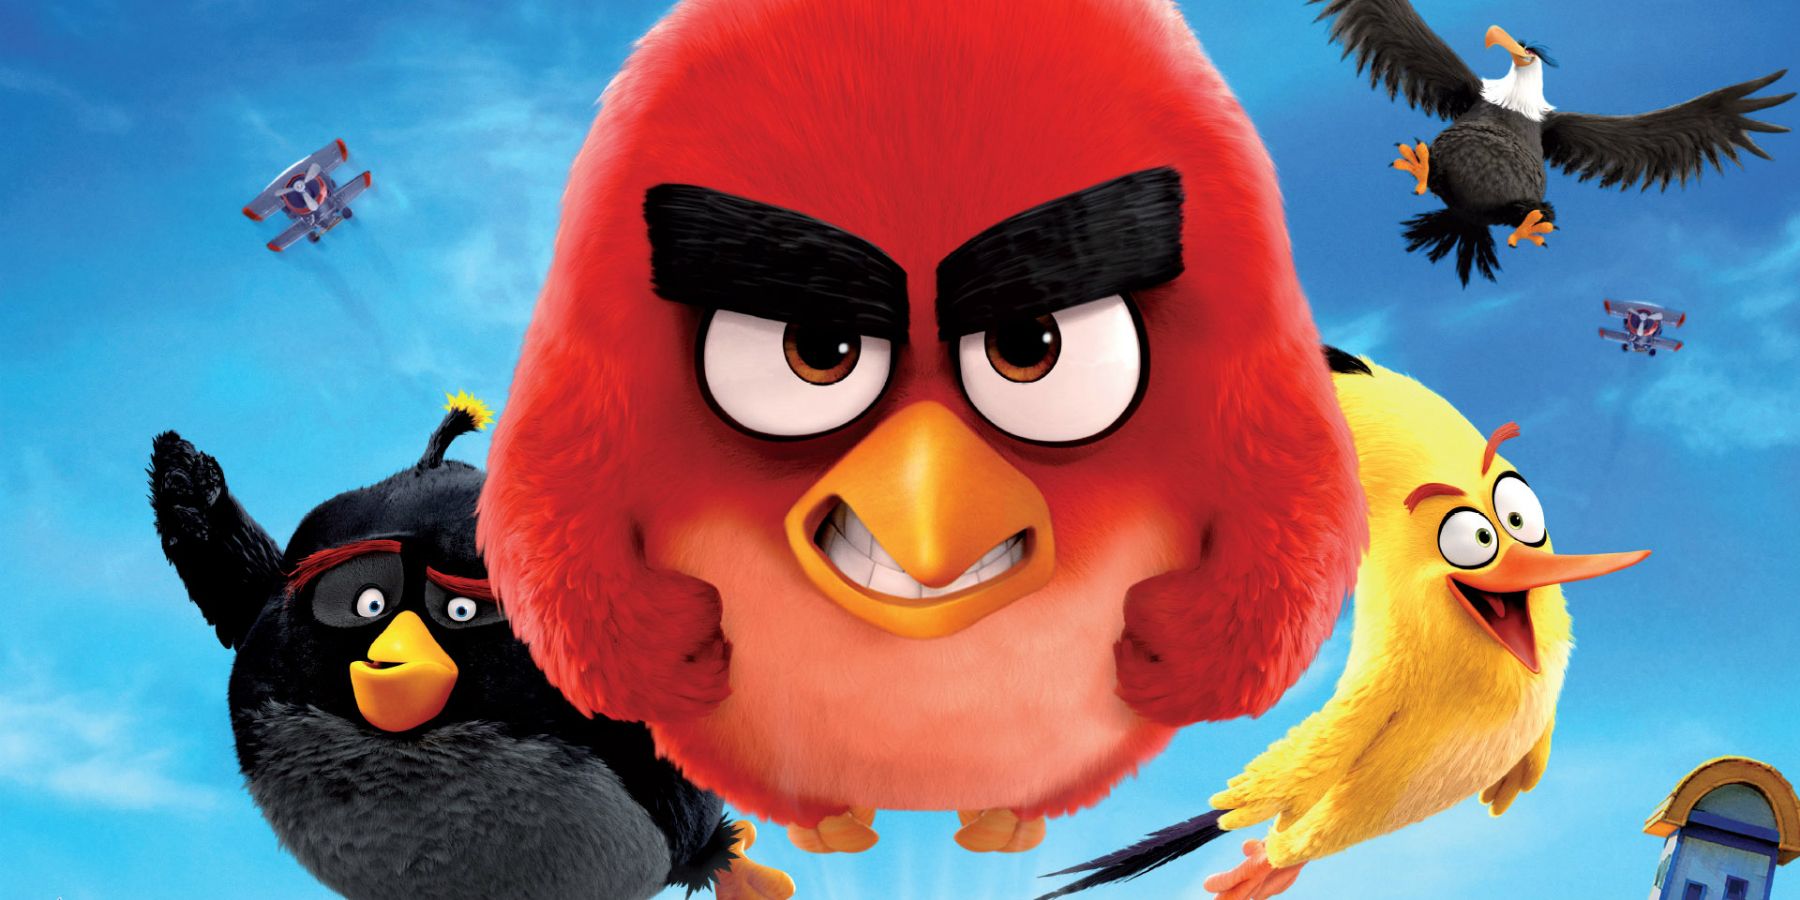 Angry Birds Movie sequel in the works